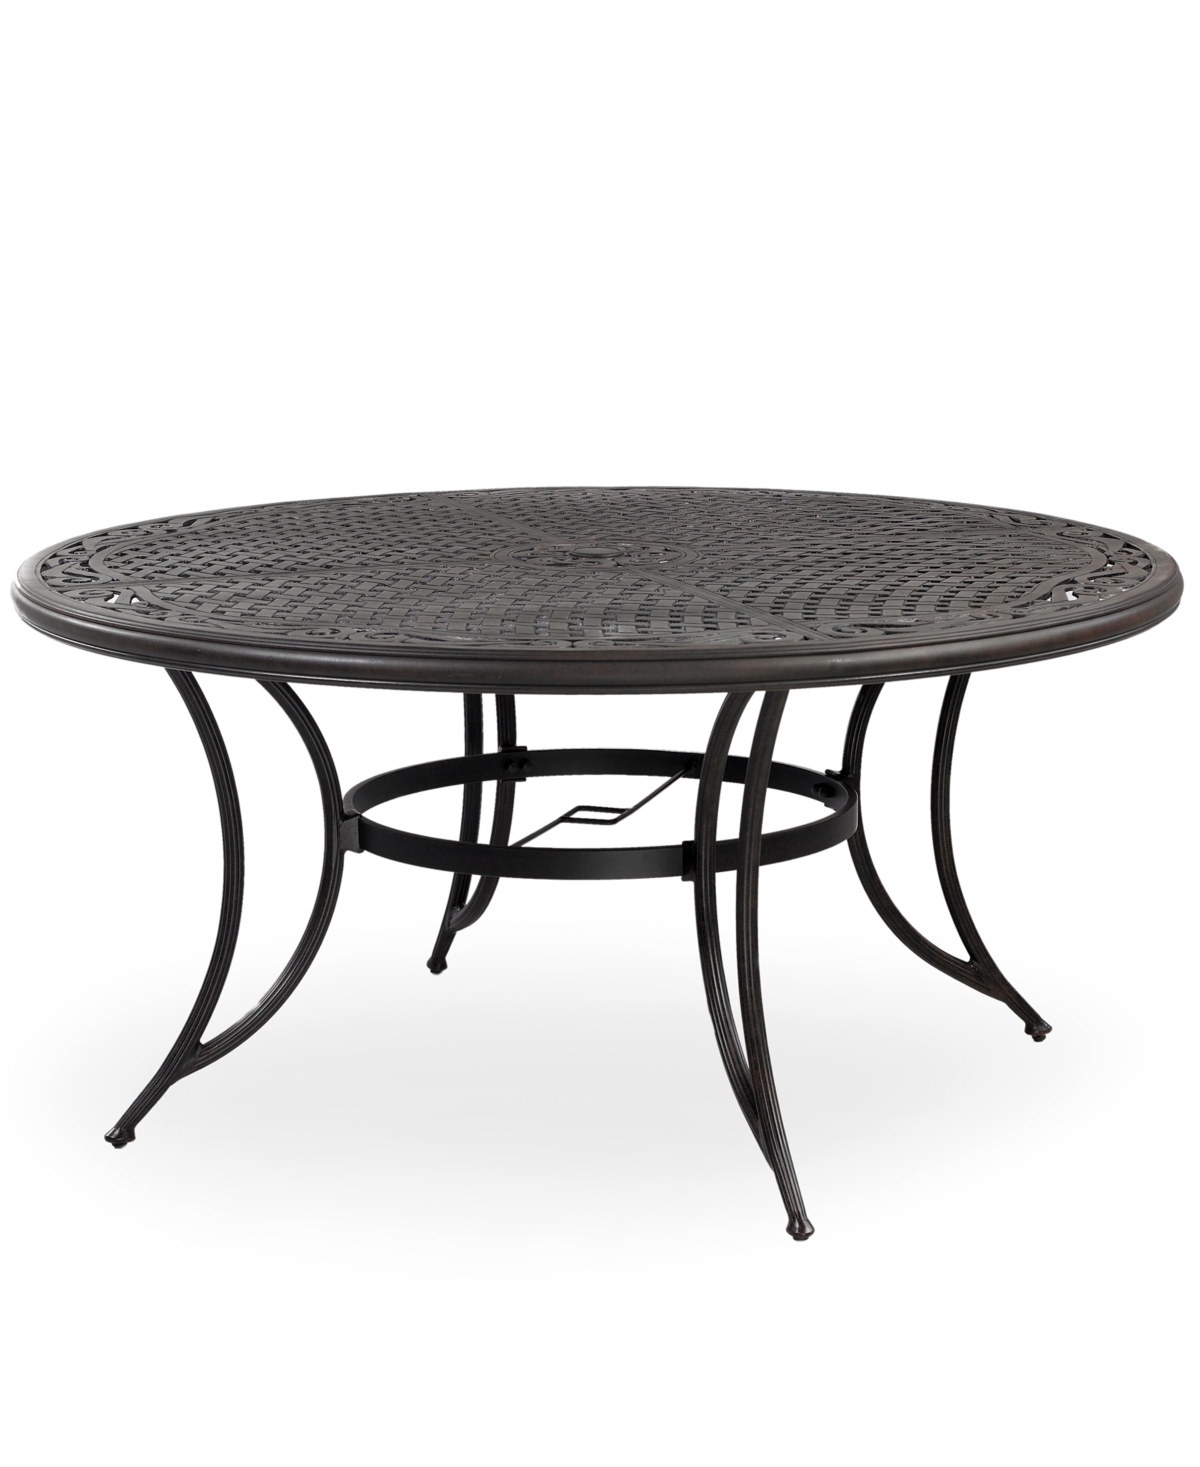 542795 48 Round Aluminum Outdoor Dining Table, Created fo sku 542795